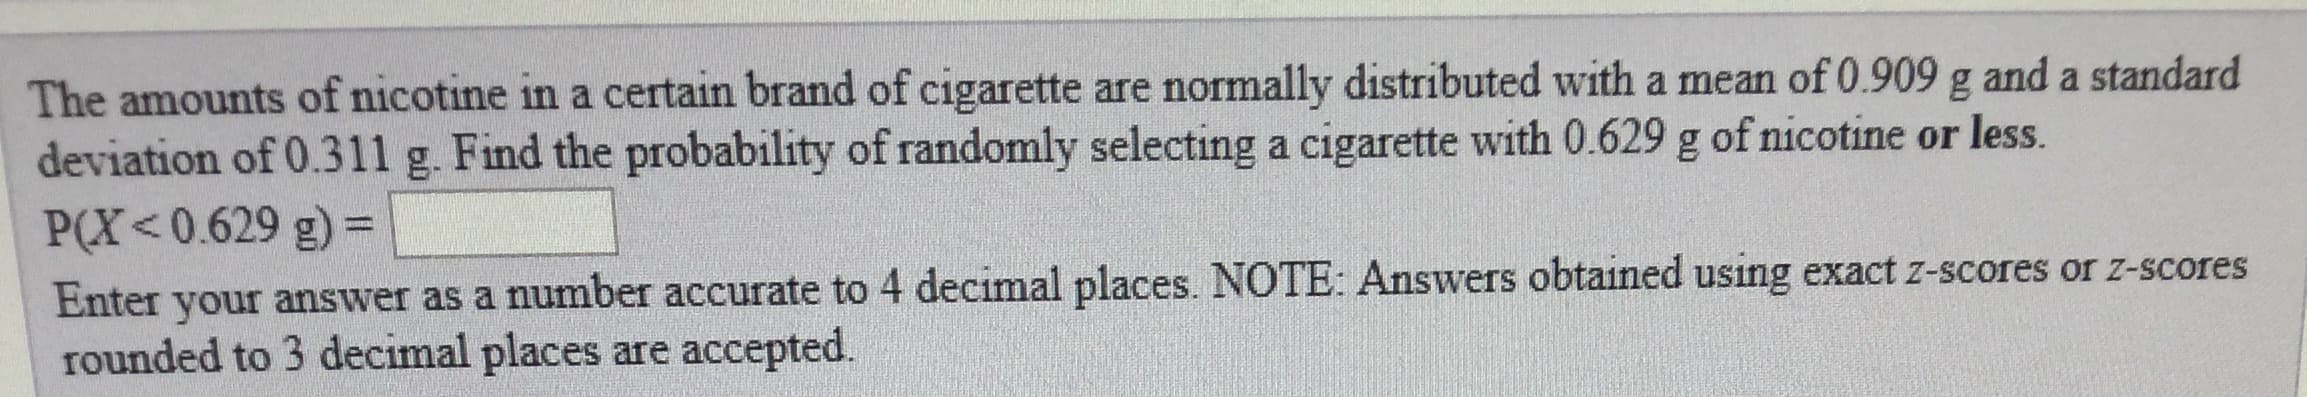 The amounts of nicotine in a certain brand of cigarette are normally distributed with a mean of 0.909 g and a standard
deviation of 0.311 g. Find the probability of randomly selecting a cigarette with 0.629 g of nicotine or less.
P(X<0.629 g)
Enter your answer as a number accurate to 4 decimal places. NOTE: Answers obtained using exact z-scores or z-scores
rounded to 3 decimal places are accepted.
